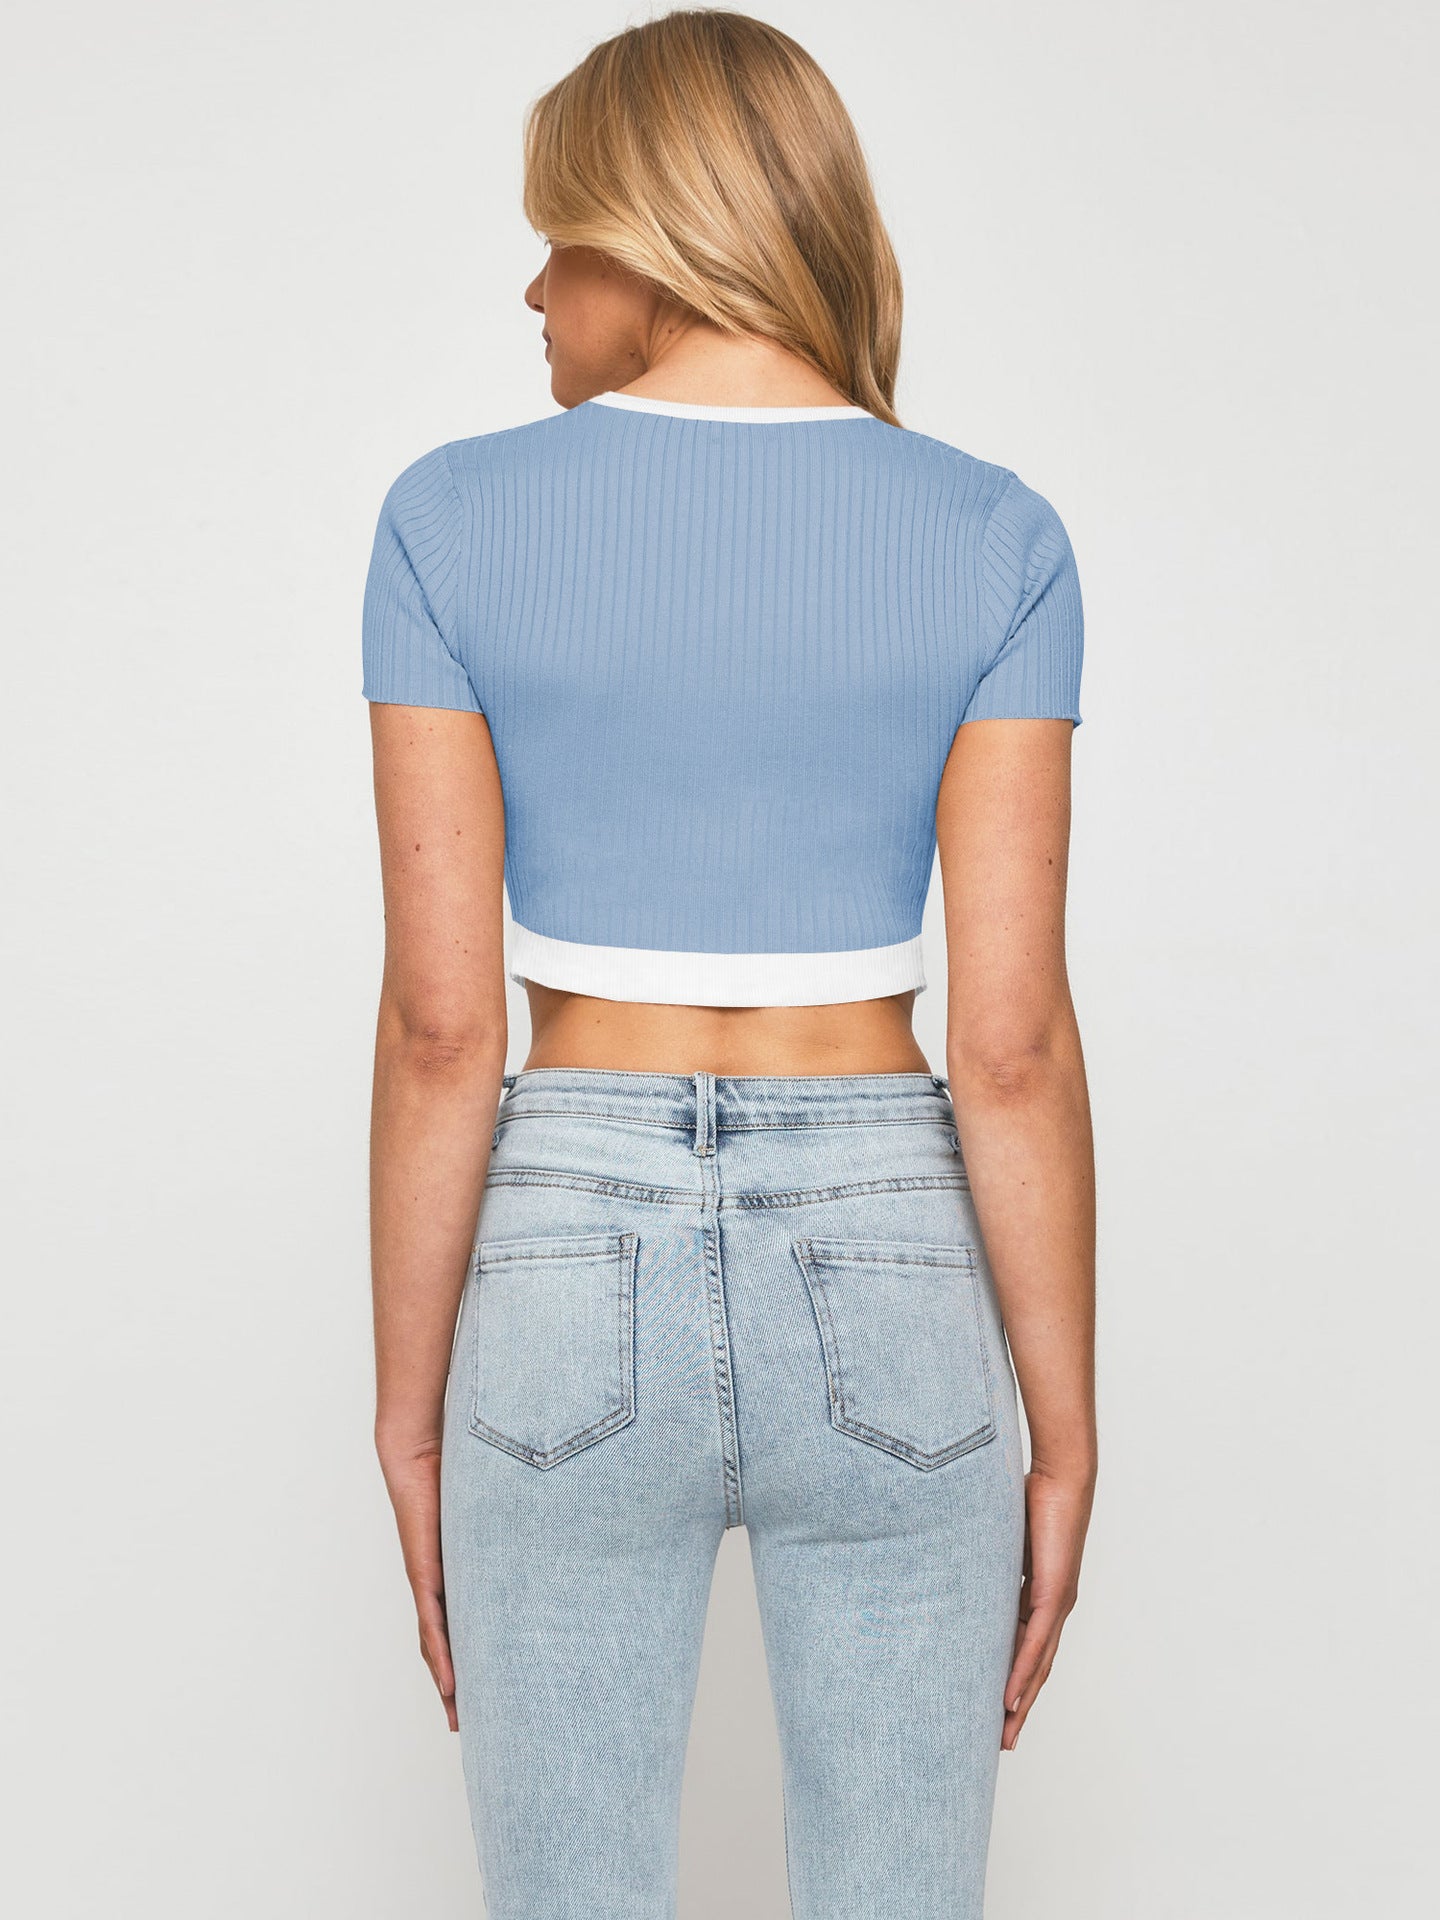 SXY Contrast Trim Pointed Hem Ribbed Crop Top